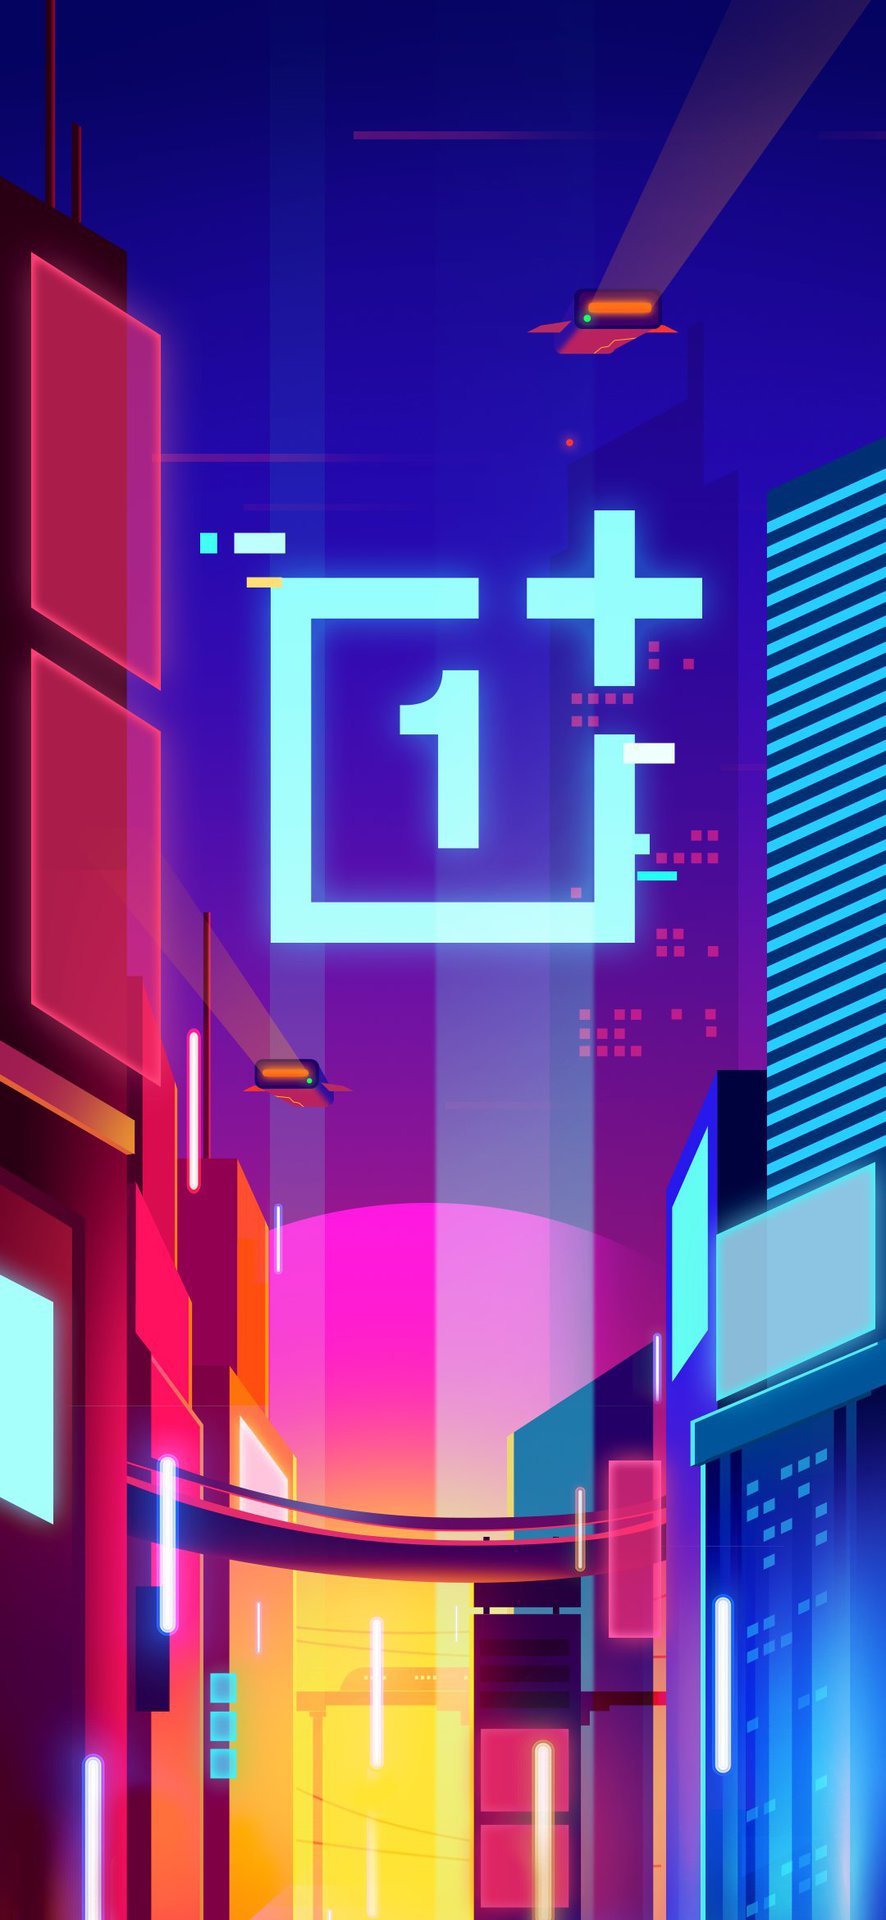 OnePlus wallpapers: Get all your favorites ones here - Android Authority